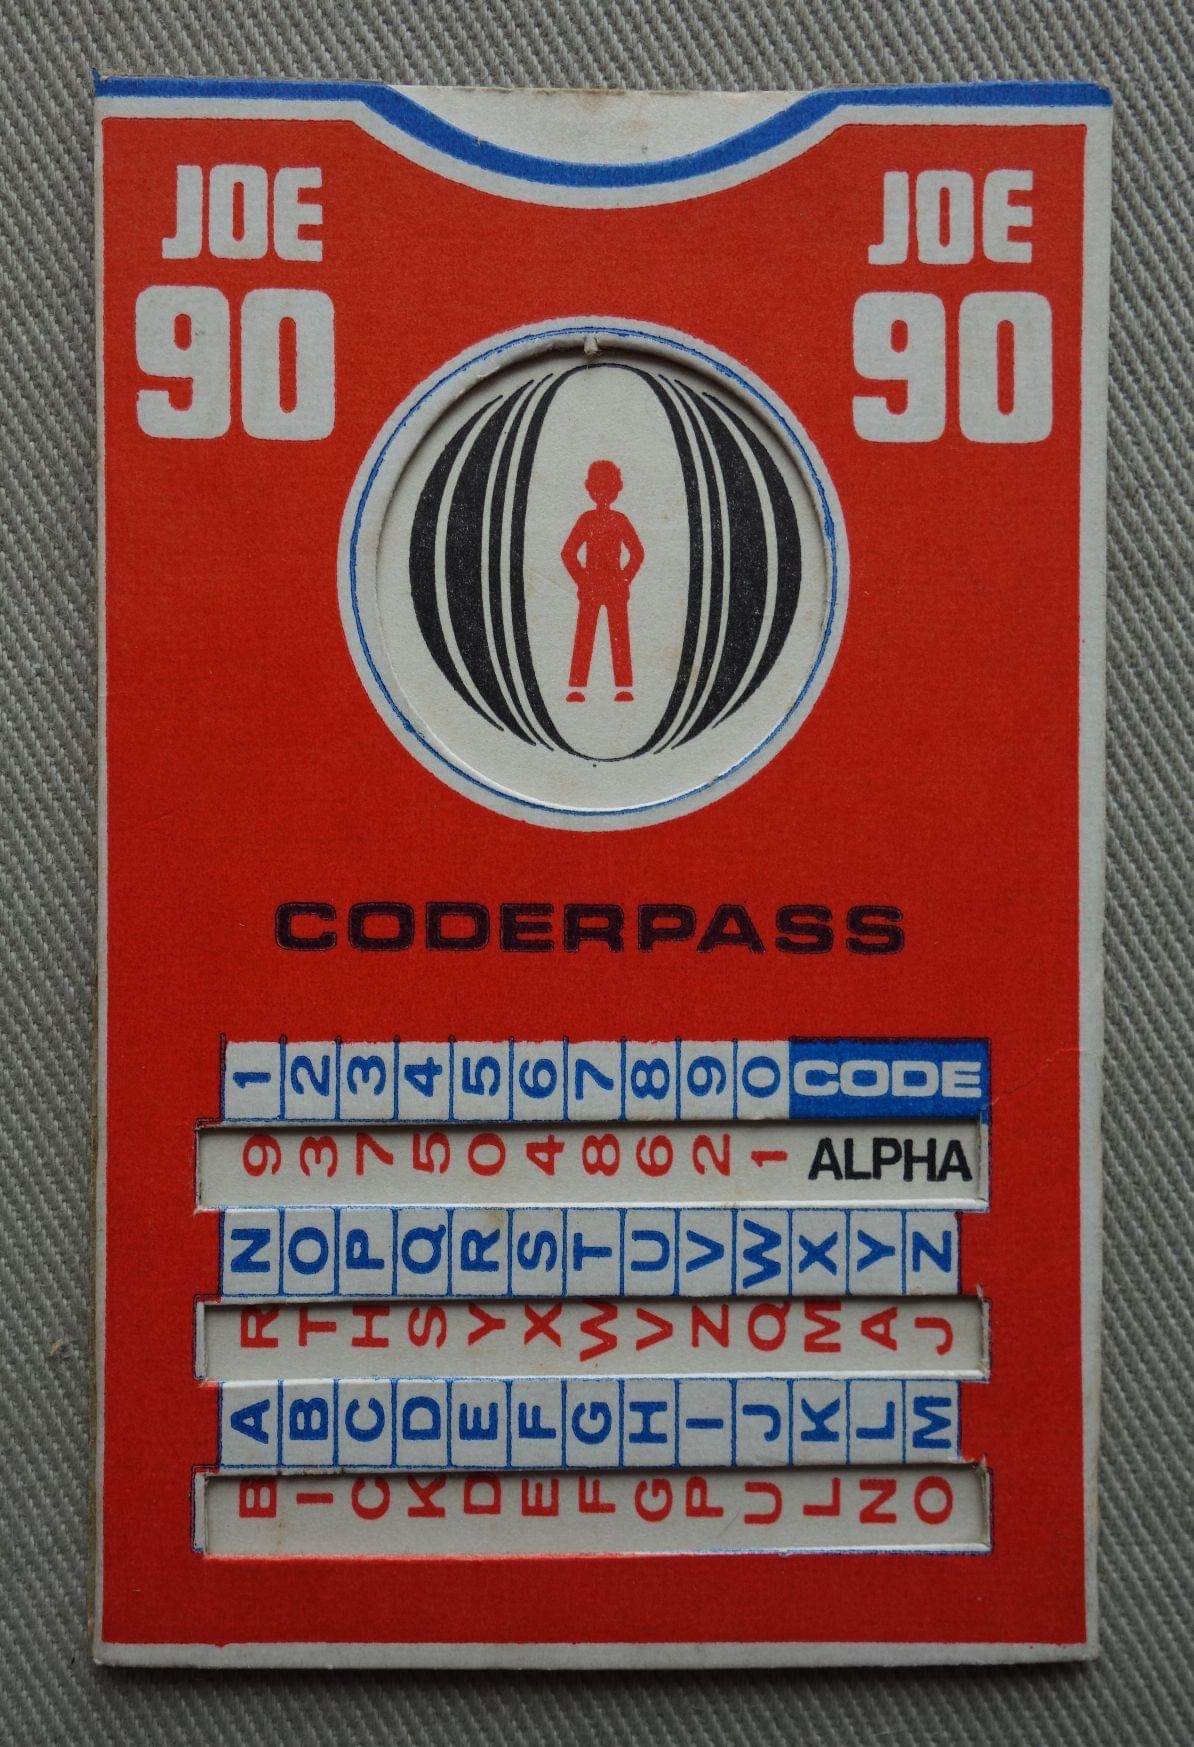 Joe 90: Top Secret Free Gift, a Coderpass, from No. 2, cover dated 25th January 1969